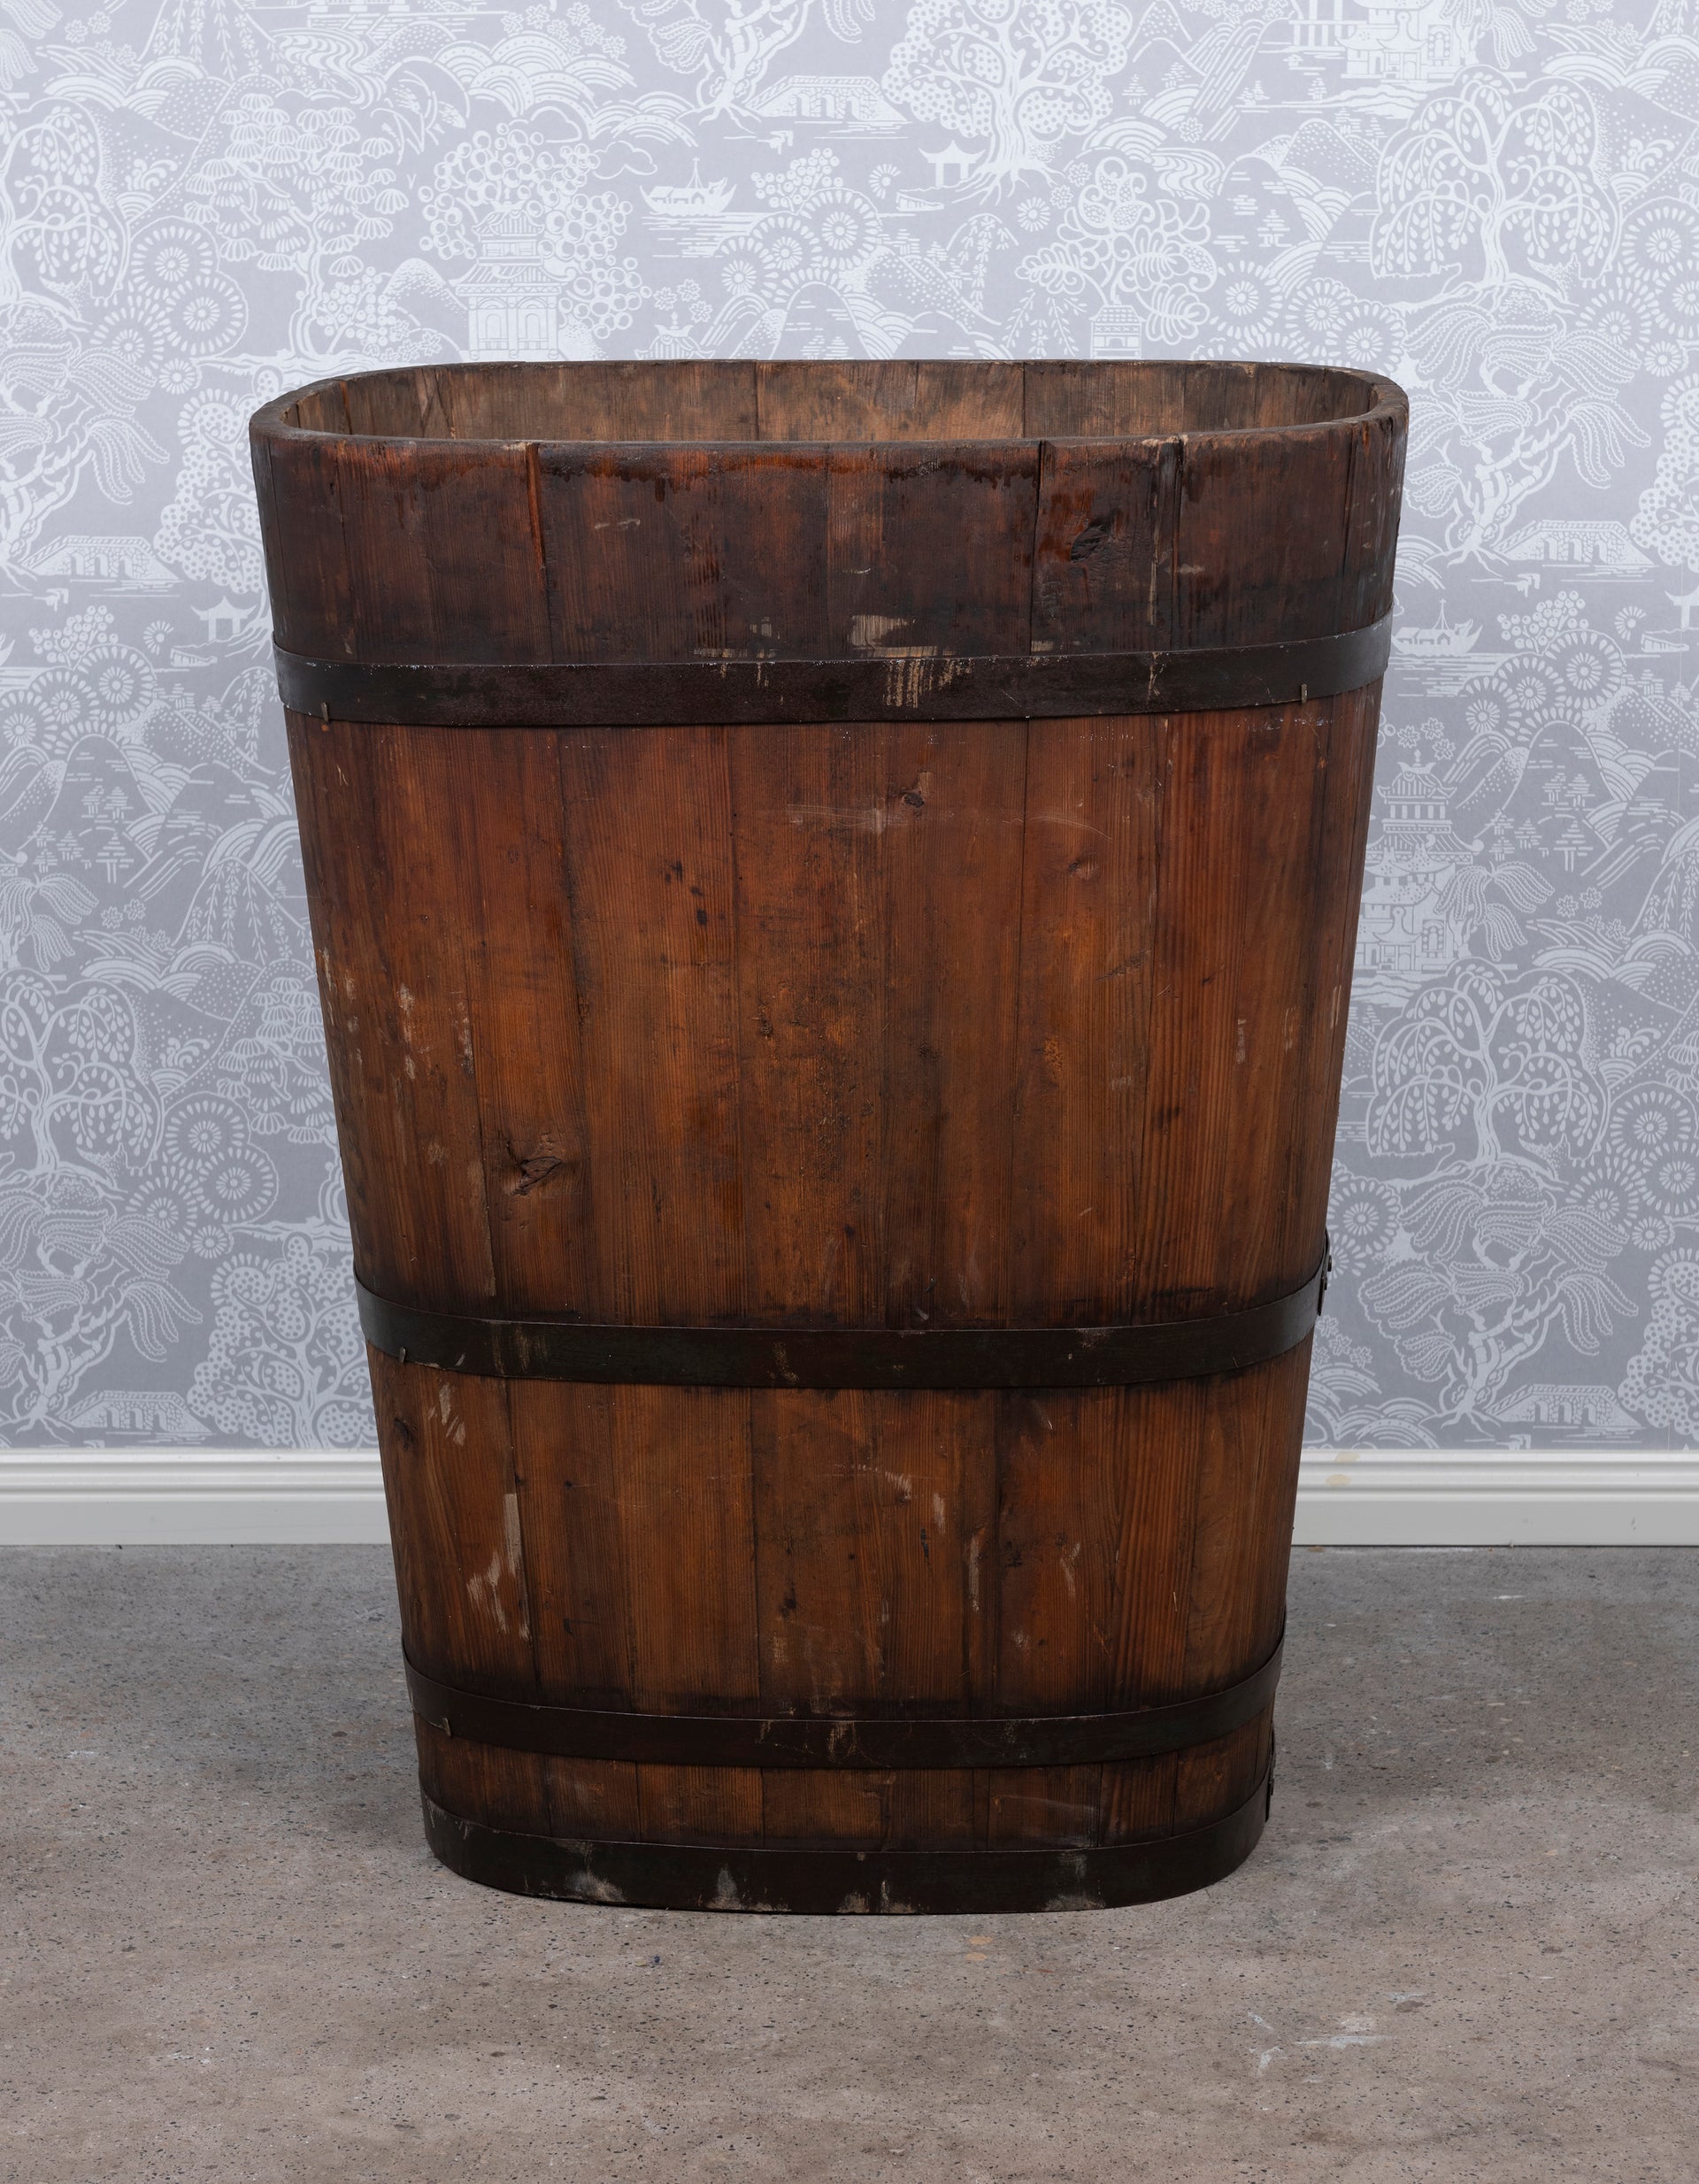 SOLD A large rectangular coopered oak and metal banded grape harvesting tub, French 19th Century